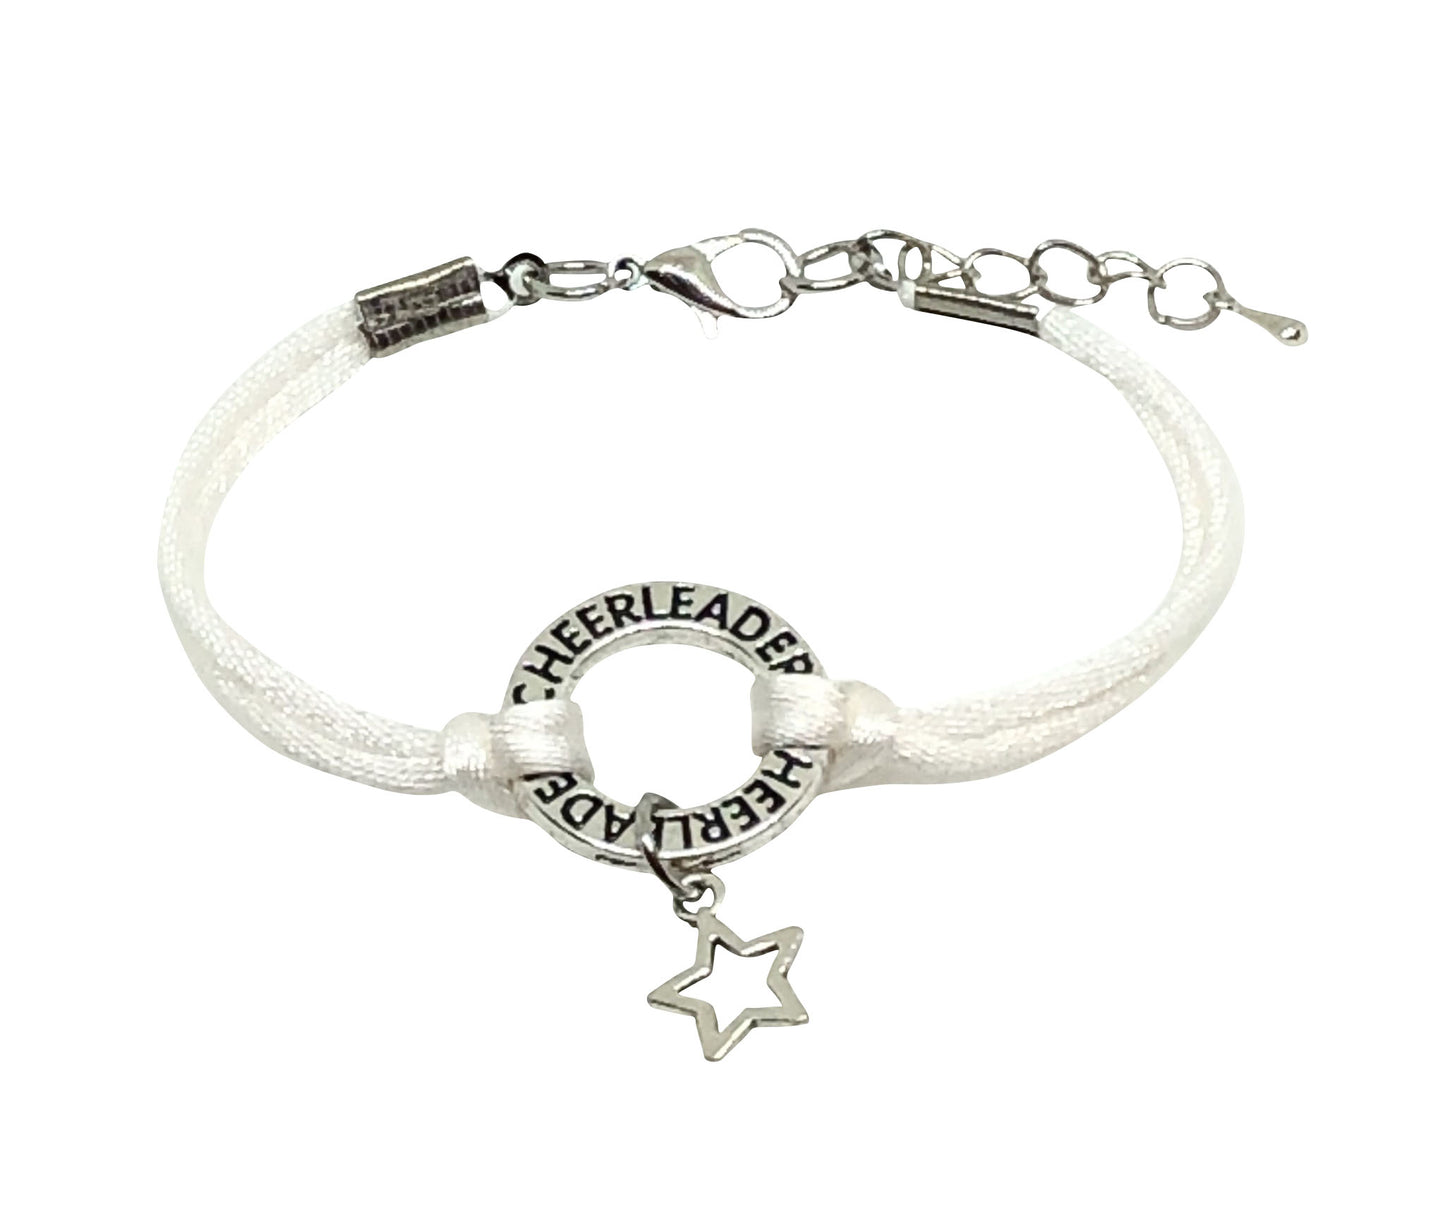 Star Cheerleading Bracelet - 6 COLORS Navy Blue - Cheer and Dance On Demand